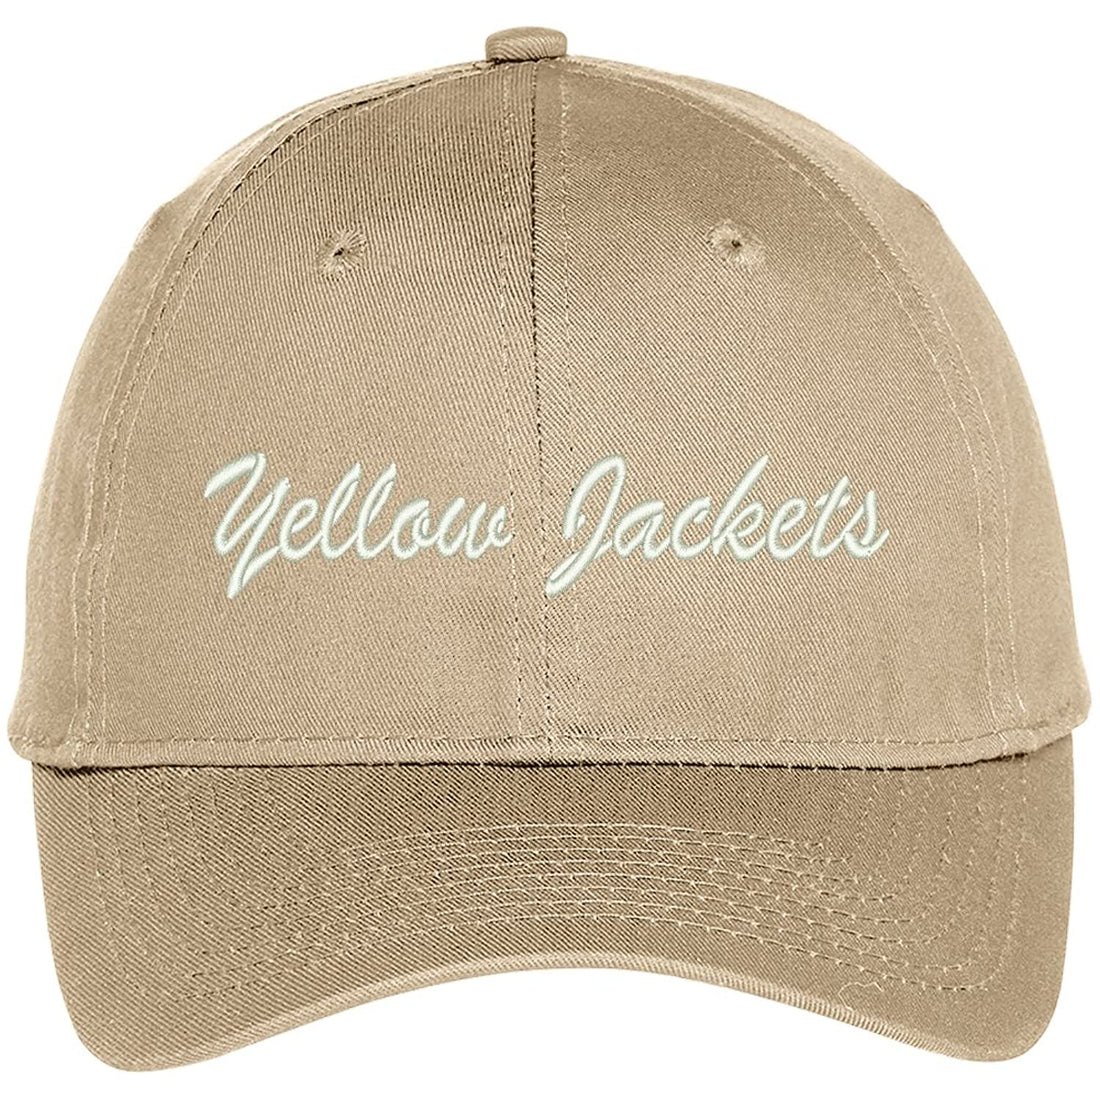 Trendy Apparel Shop Yellow Jackets Embroidered Team Nickname Mascot Cap